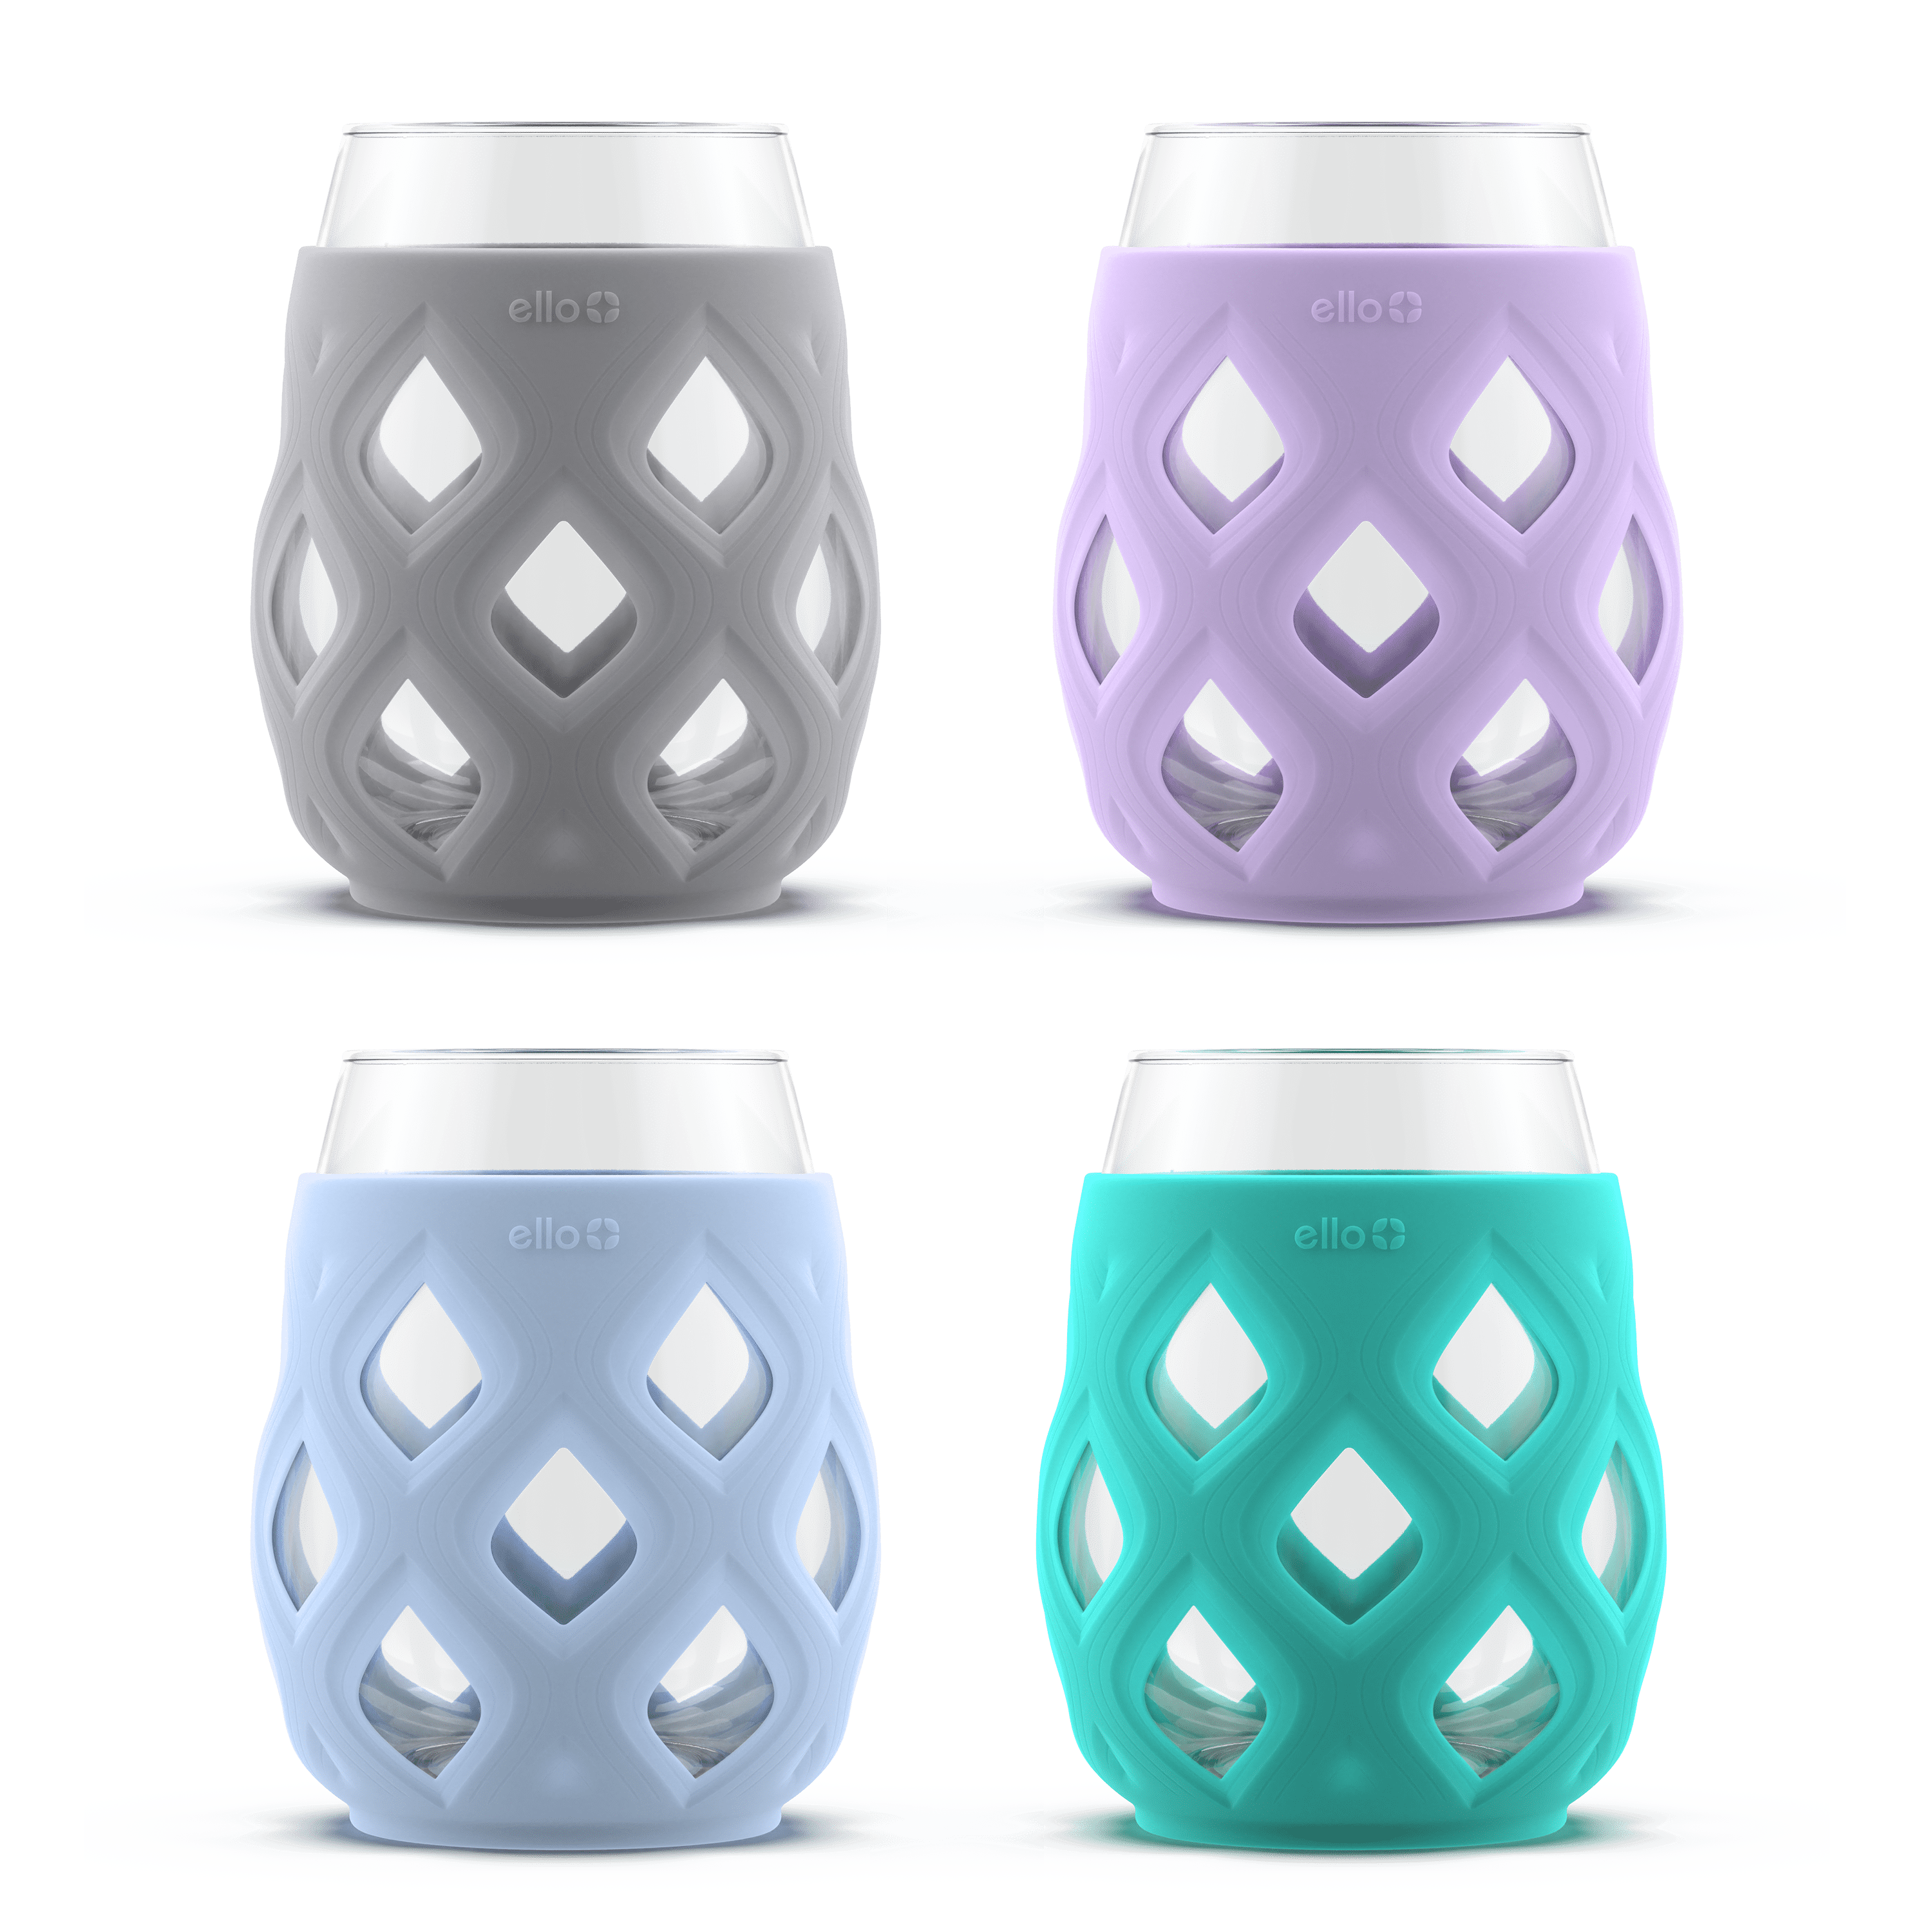  Ello Cru 17oz Stemless Wine Glass Set with Protective Silicone  Sleeves, 6 Pack Cocktail Glass Perfect for Summer Patios, Parties, Holiday  Gifting for Her Him, Dishwasher Safe, Berry Smash : Home